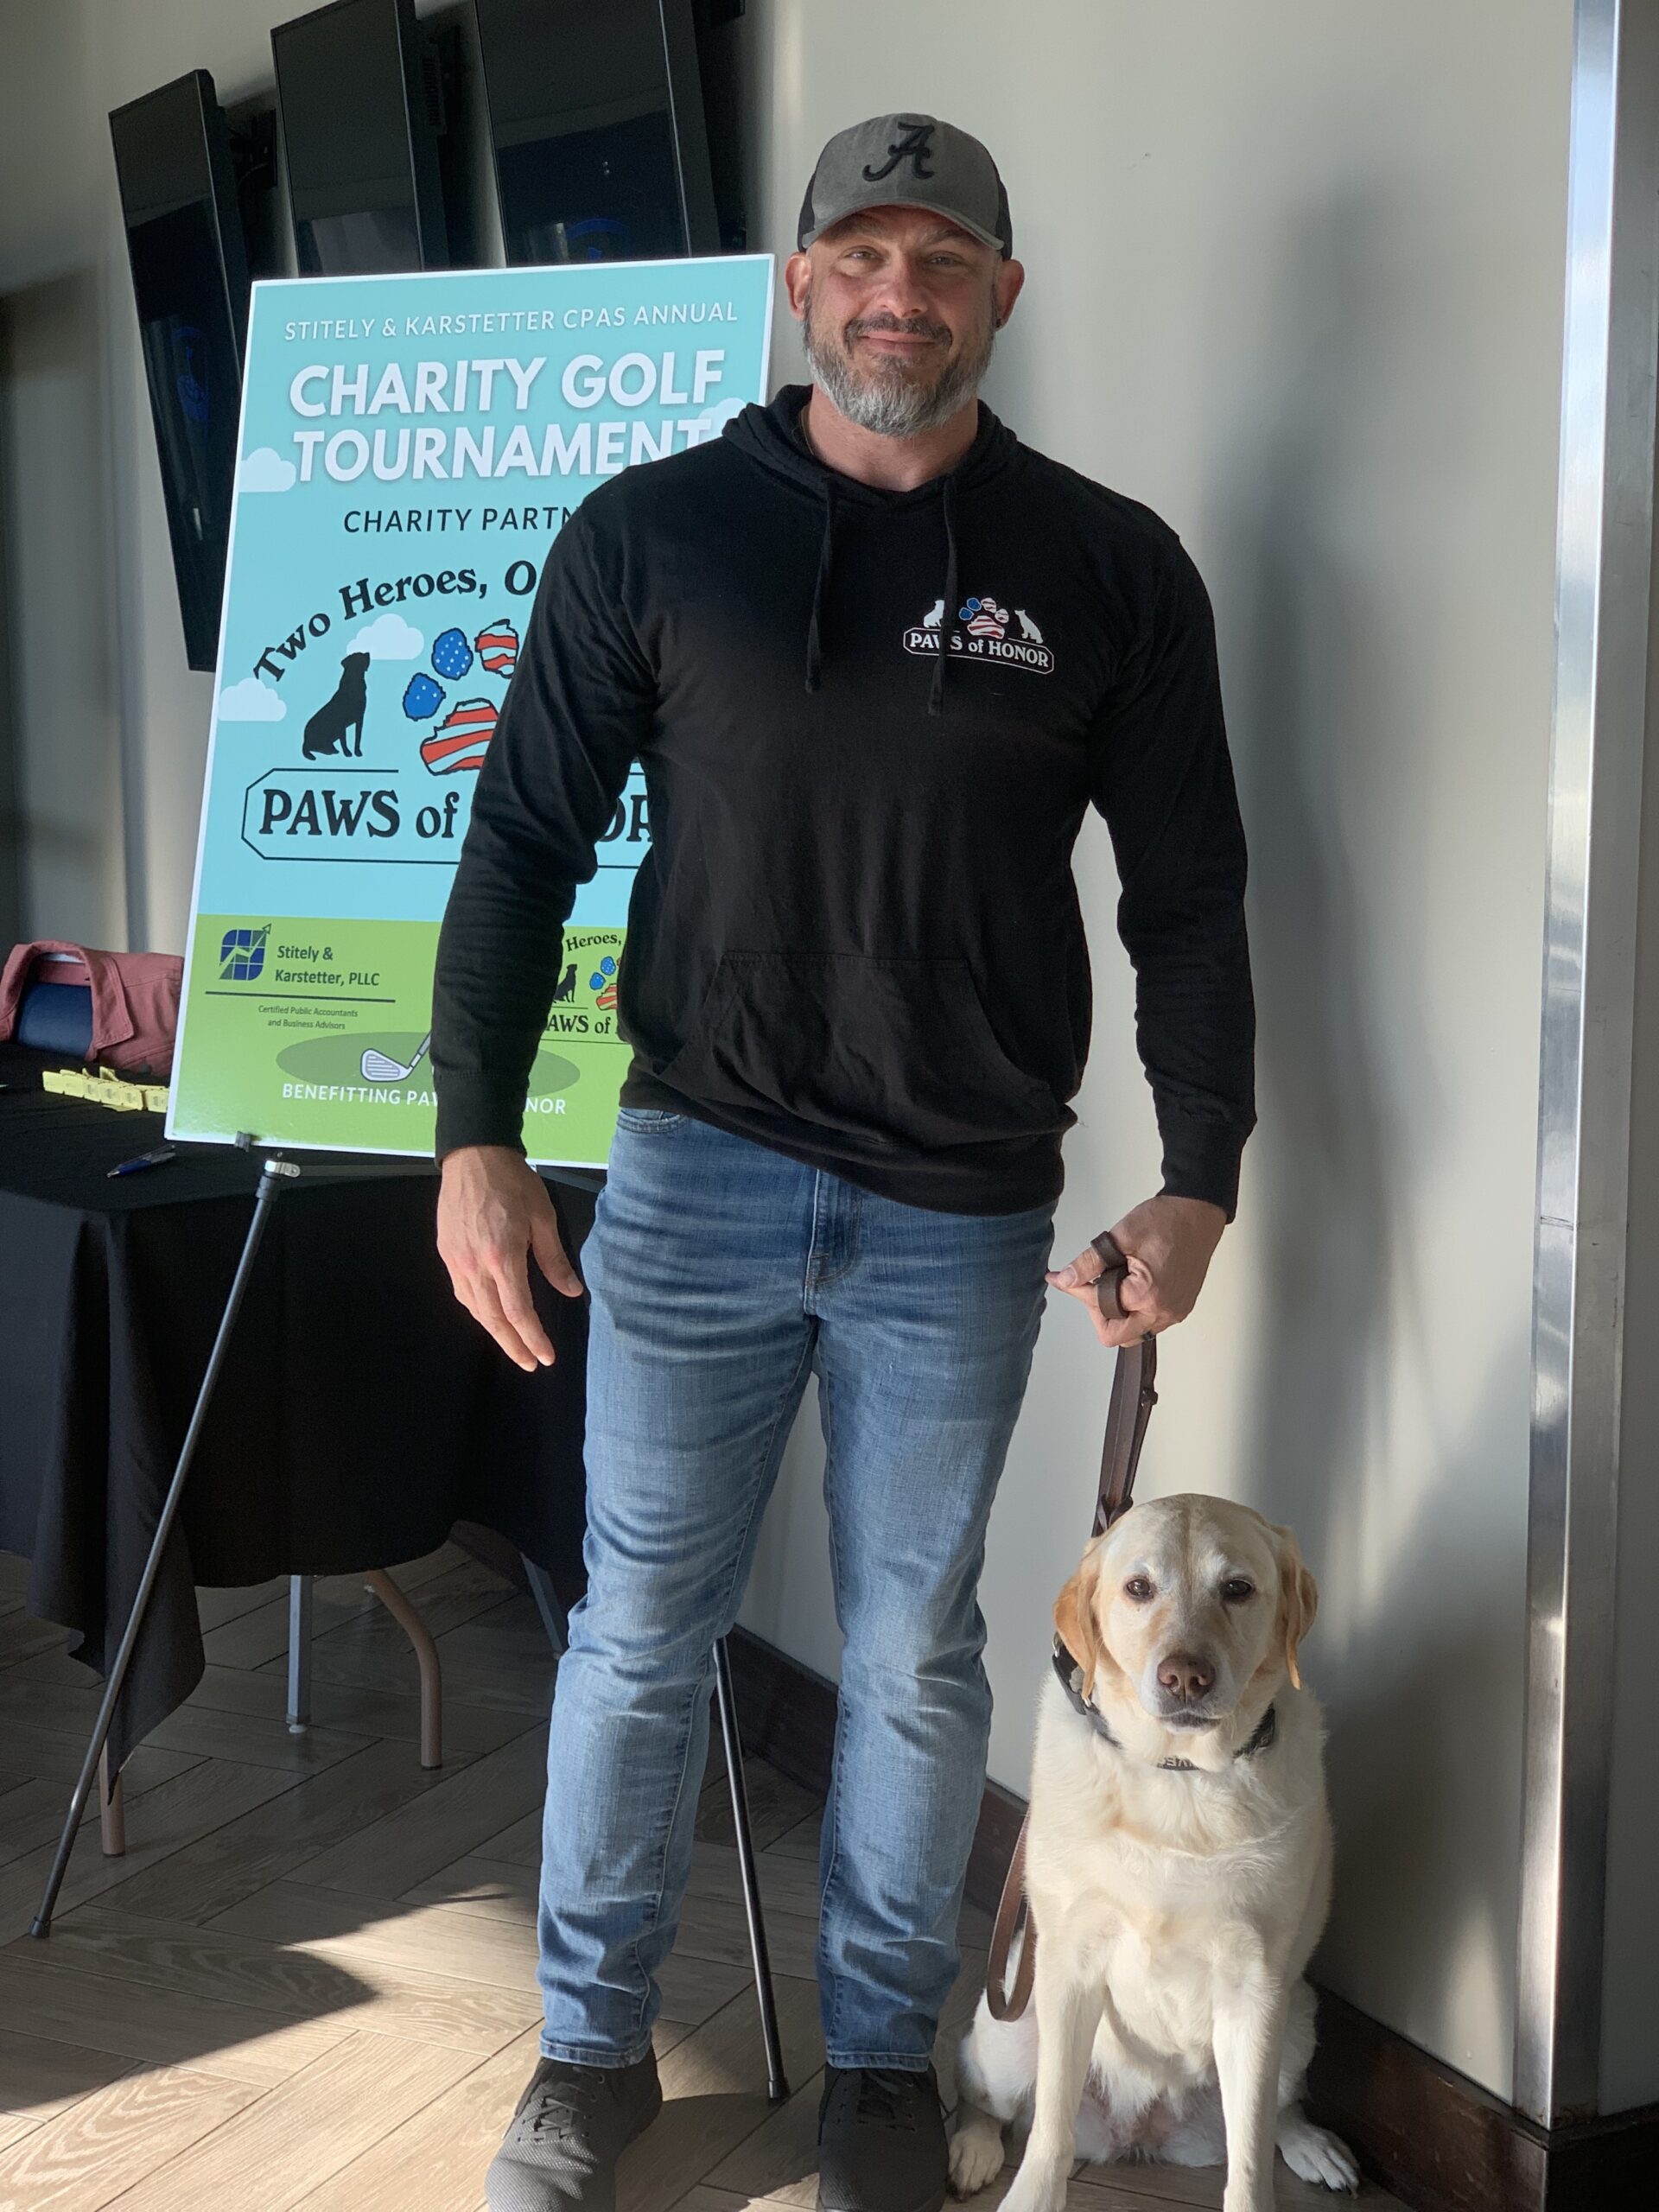 S&K Sponsors Charity Golf Event, Raises $3,000 for Paws of Honor